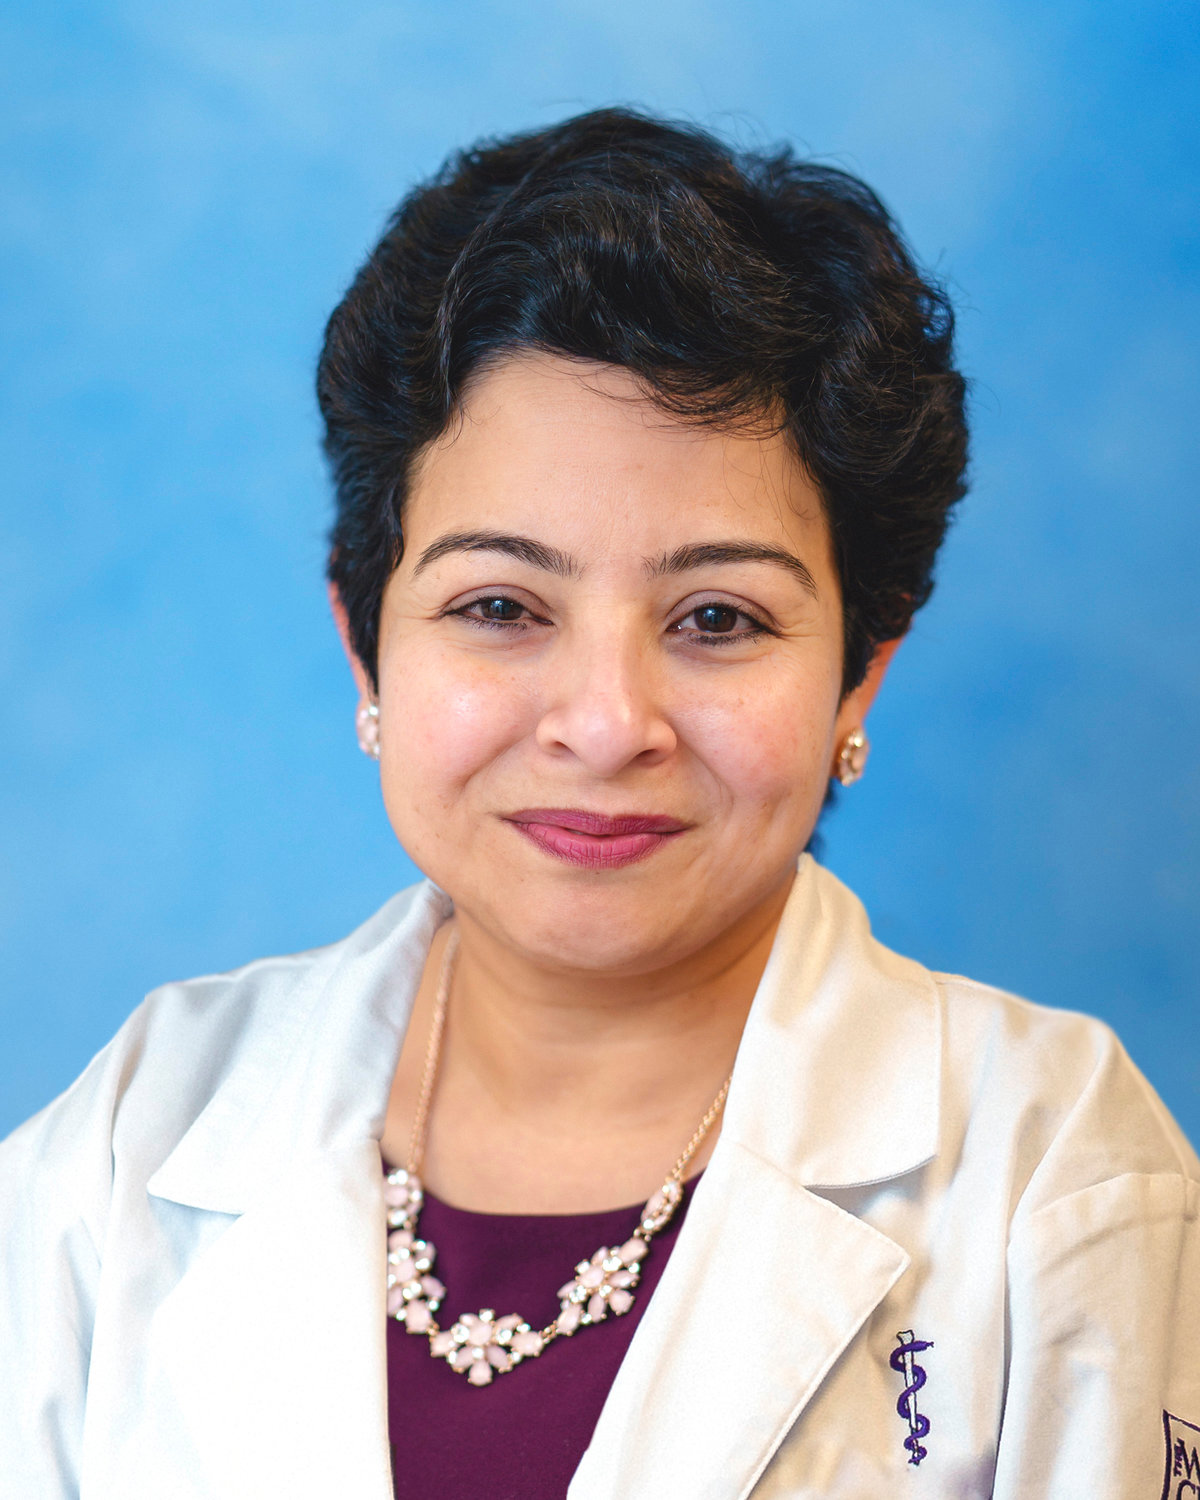 Dr. Jumee Barooah, a primary care physician with the Wright Center for Graduate Medical Education, is now certified in lifestyle medicine.